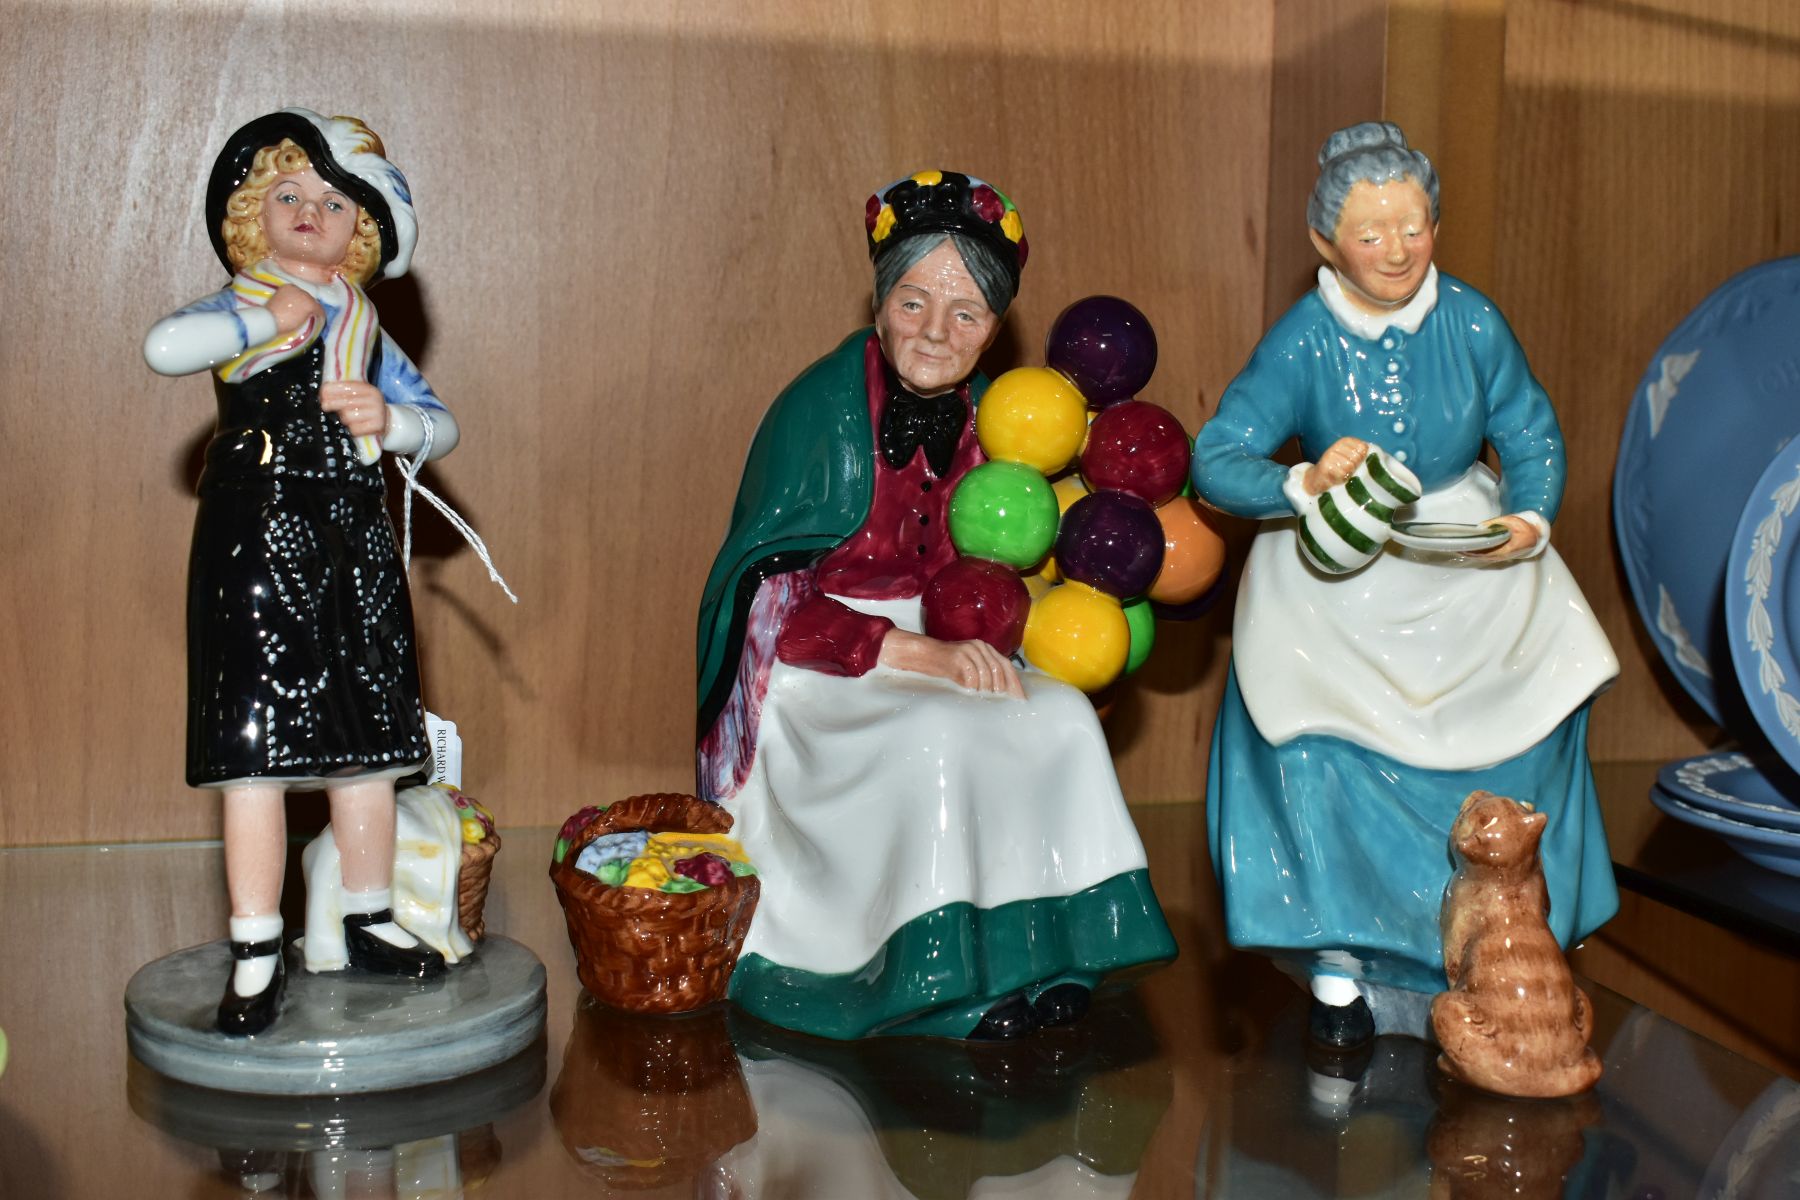 THREE ROYAL DOULTON FIGURES, Pearly Girl HN2769, The Favourite HN2249 (slight discolouration